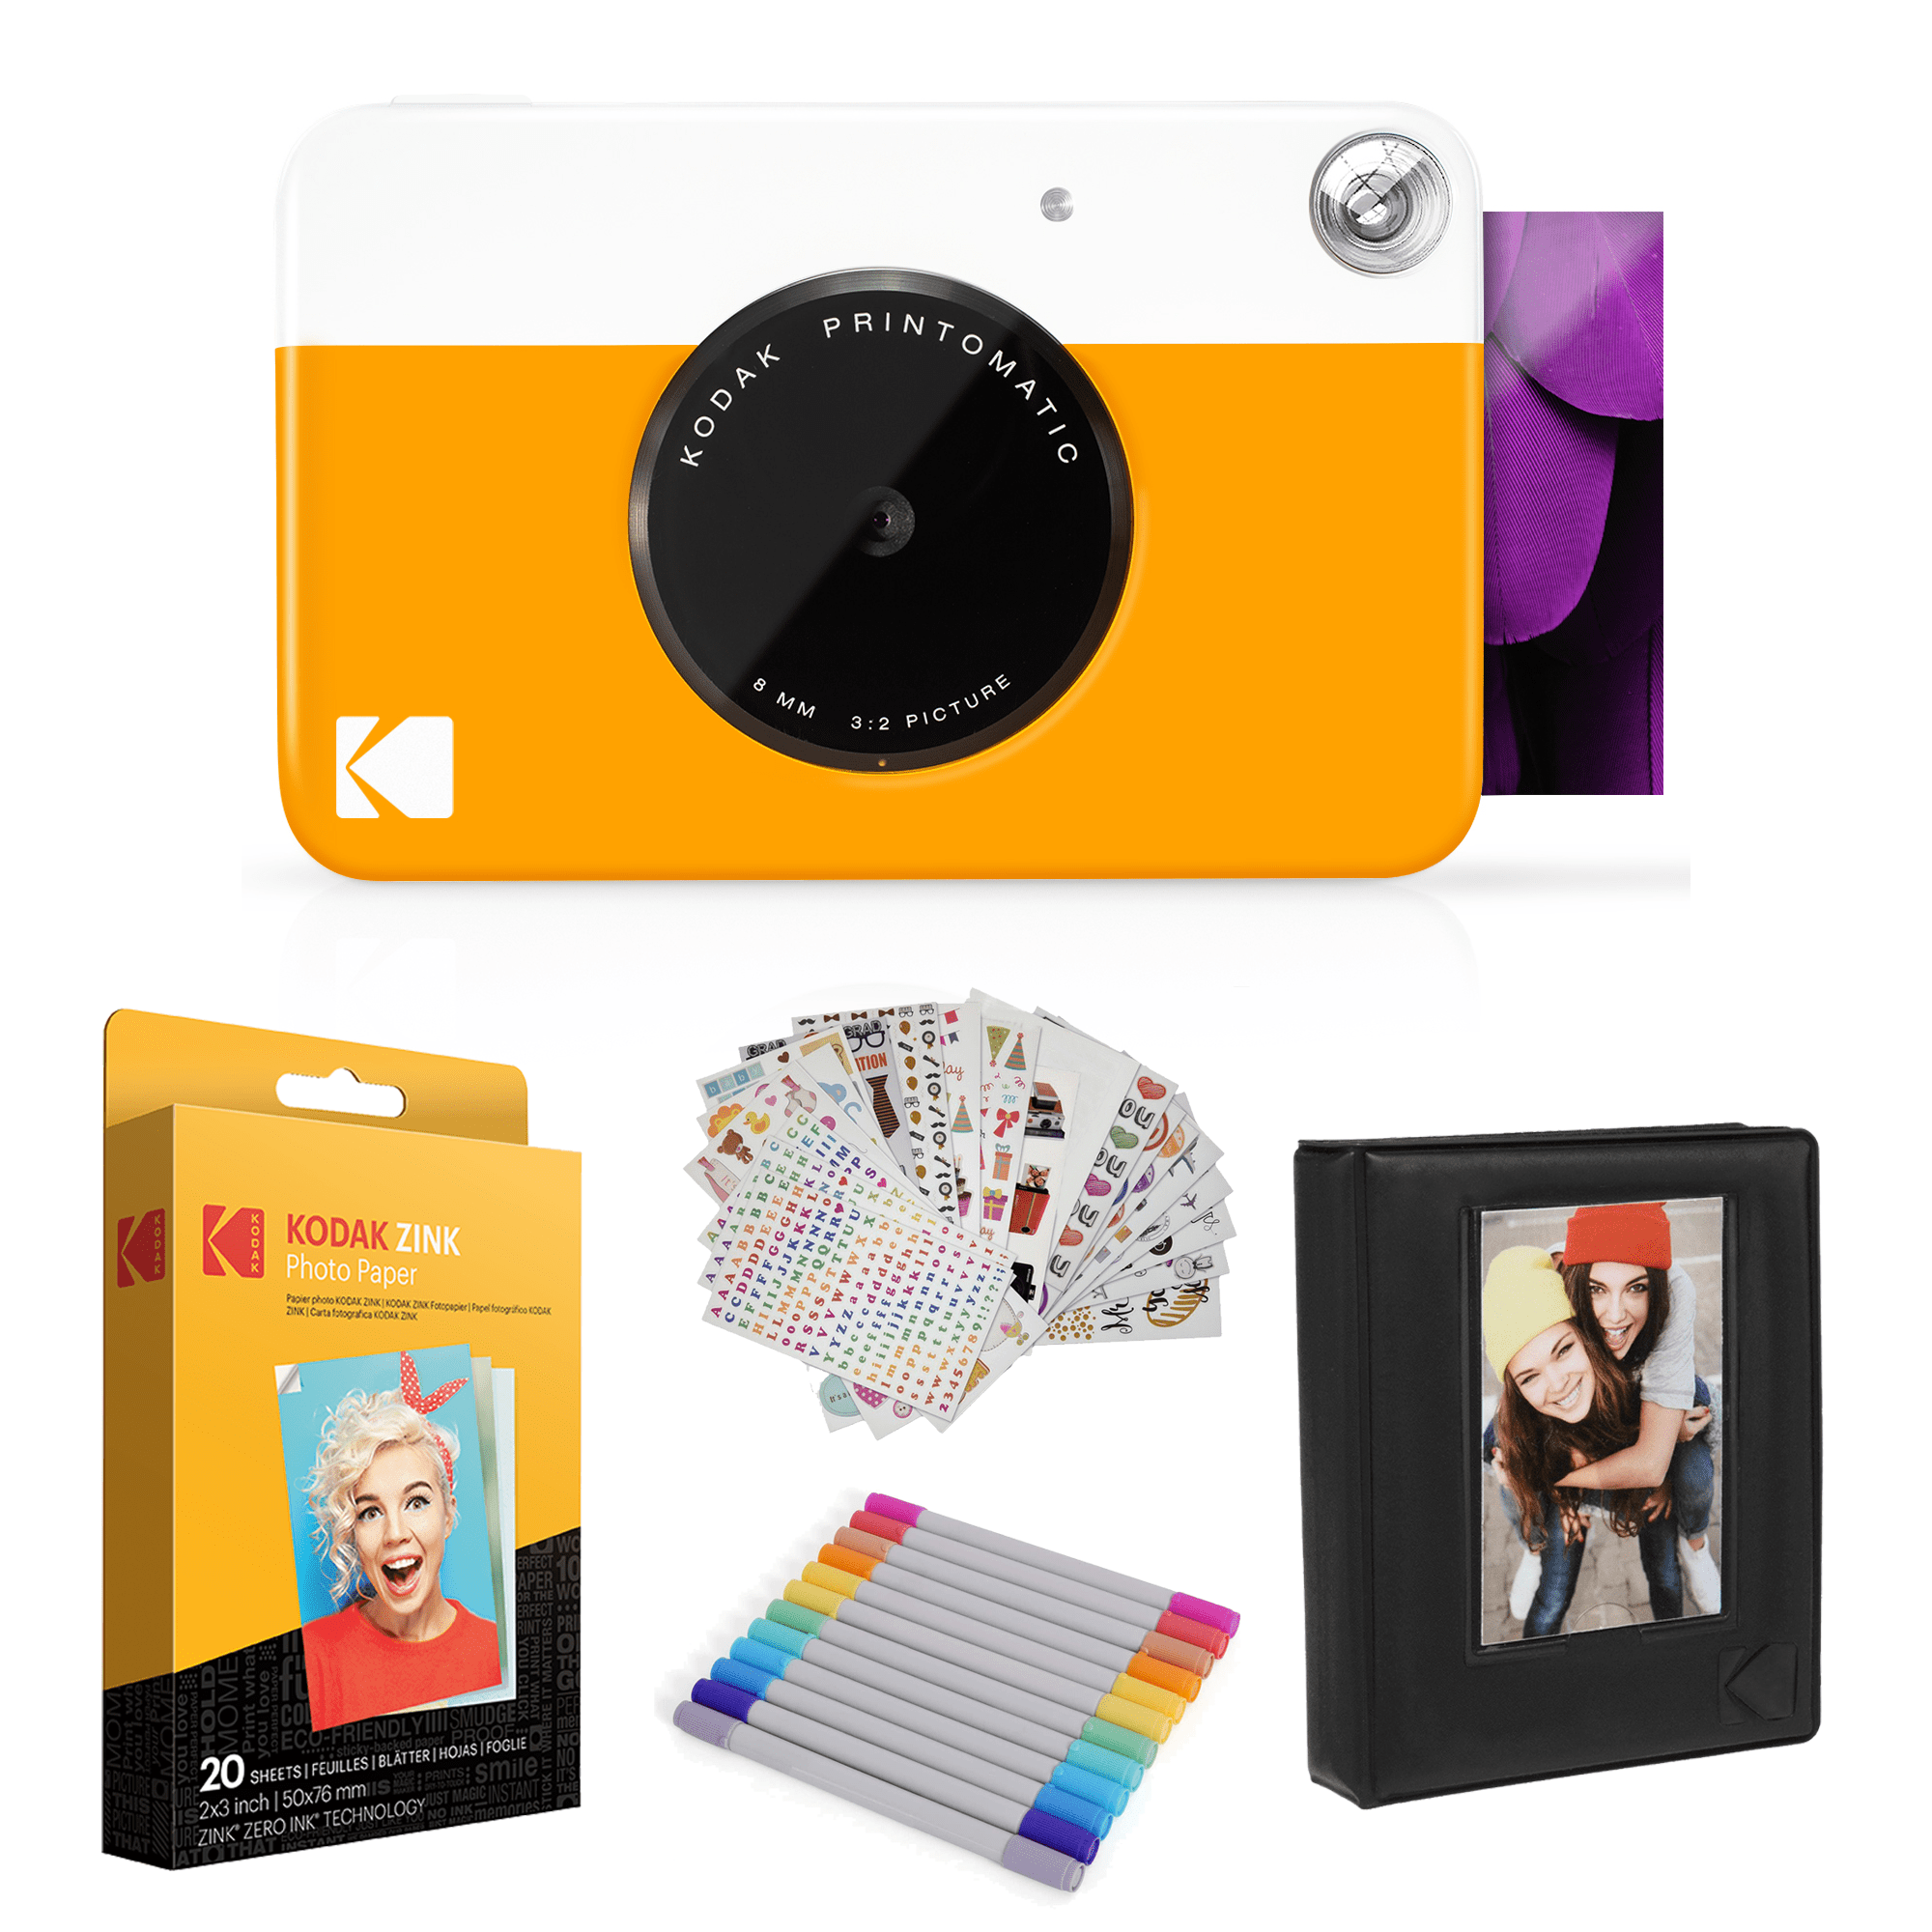  KODAK Printomatic Digital Instant Print Camera - Full Color  Prints On ZINK 2x3 Sticky-Backed Photo Paper (Yellow) Print Memories  Instantly : Electronics